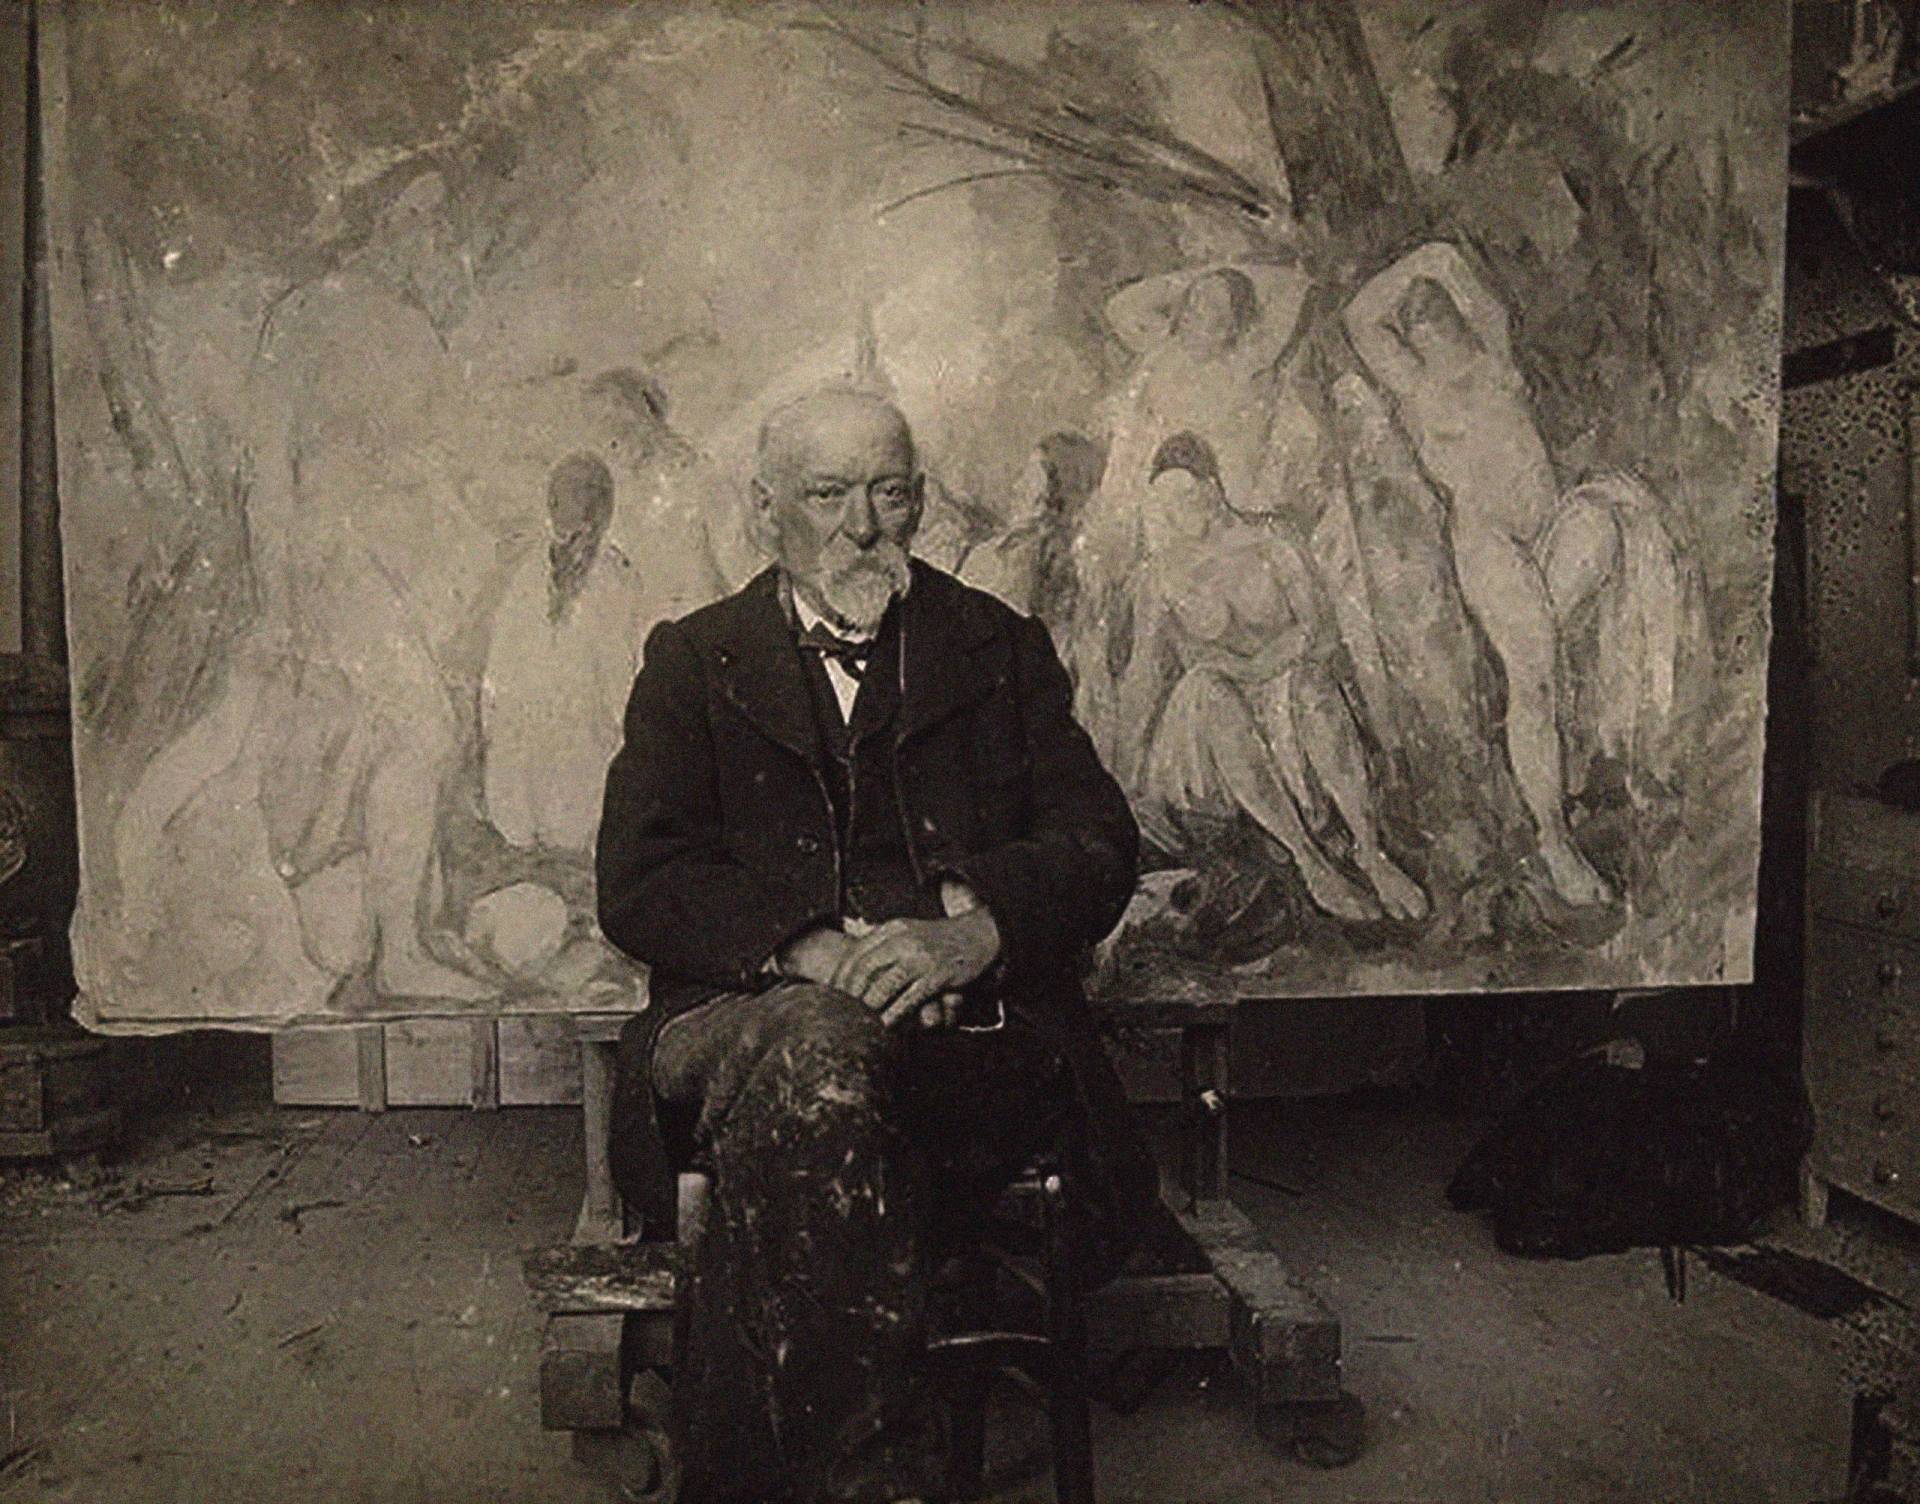 An elderly man with white beard in a suit sits in front of a painting of people and trees.